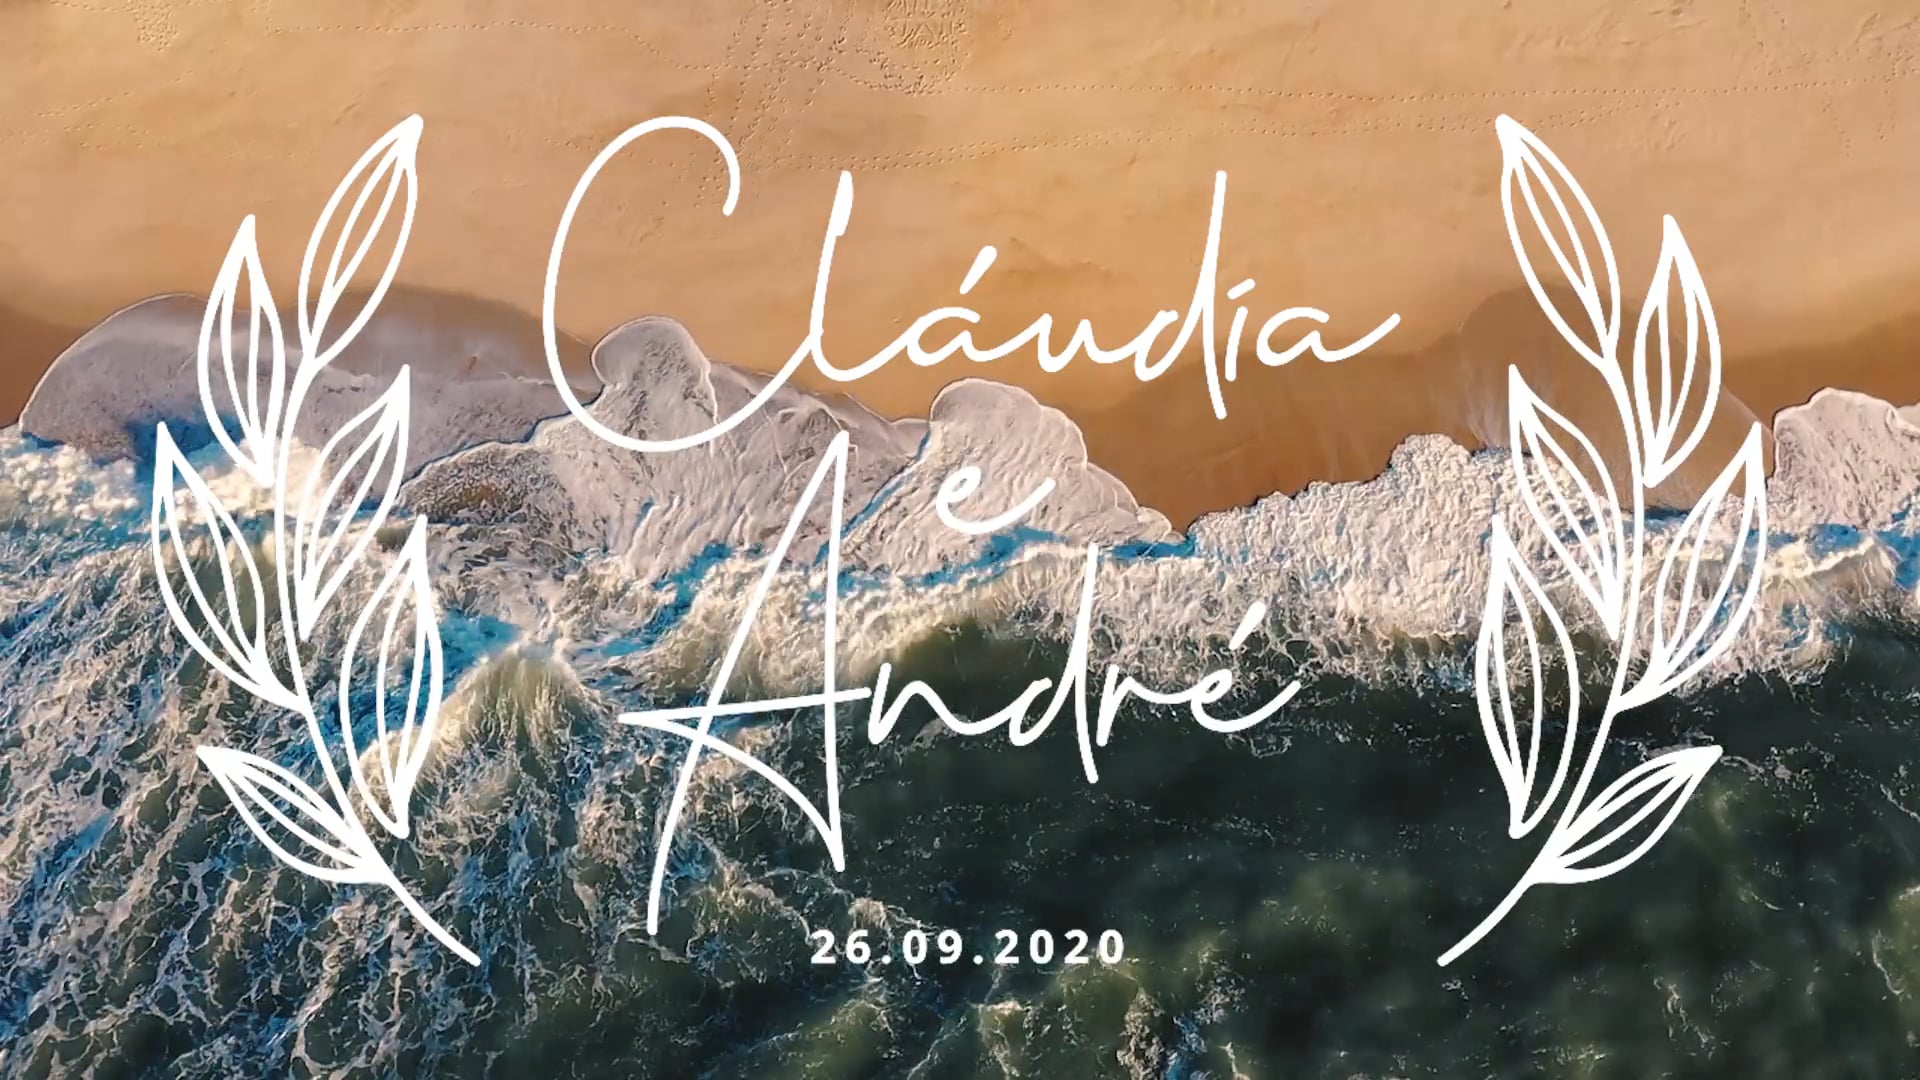 Claudia e André: Save the Date!